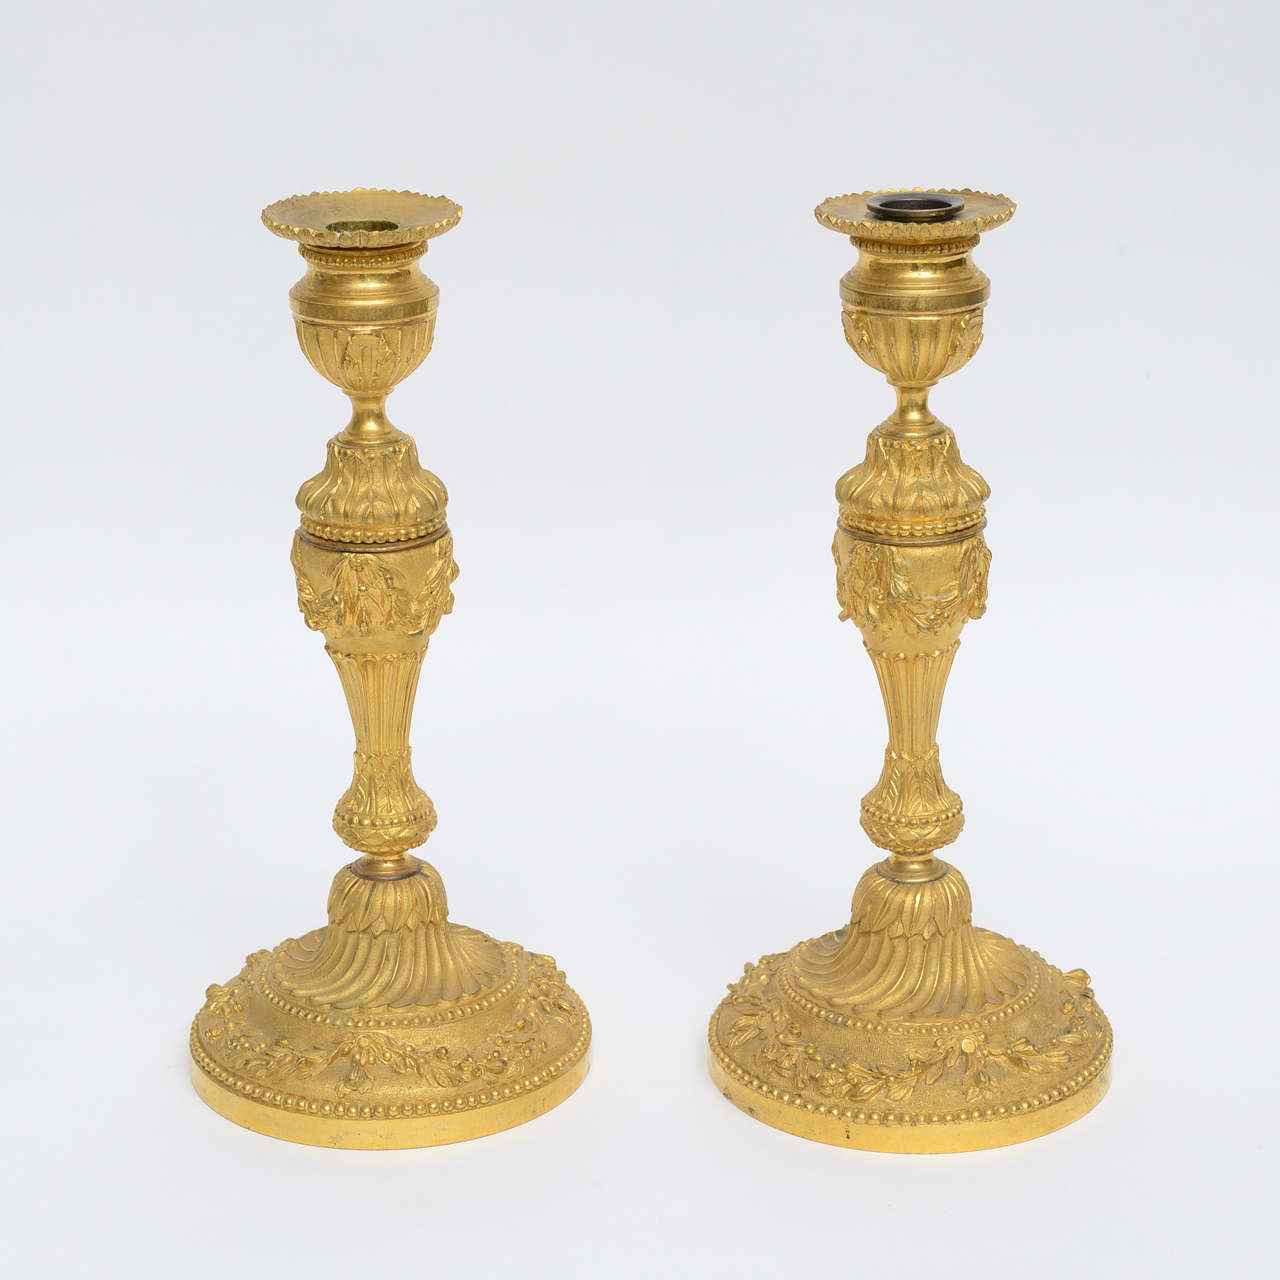 Pair of monumental 18th century, French gilt bronze candleholders, with festooned garland surround to perimeter base, assorted leaf design details throughout, with fluting, hobnail dots, and topped up with small scalloping to perimeter top of